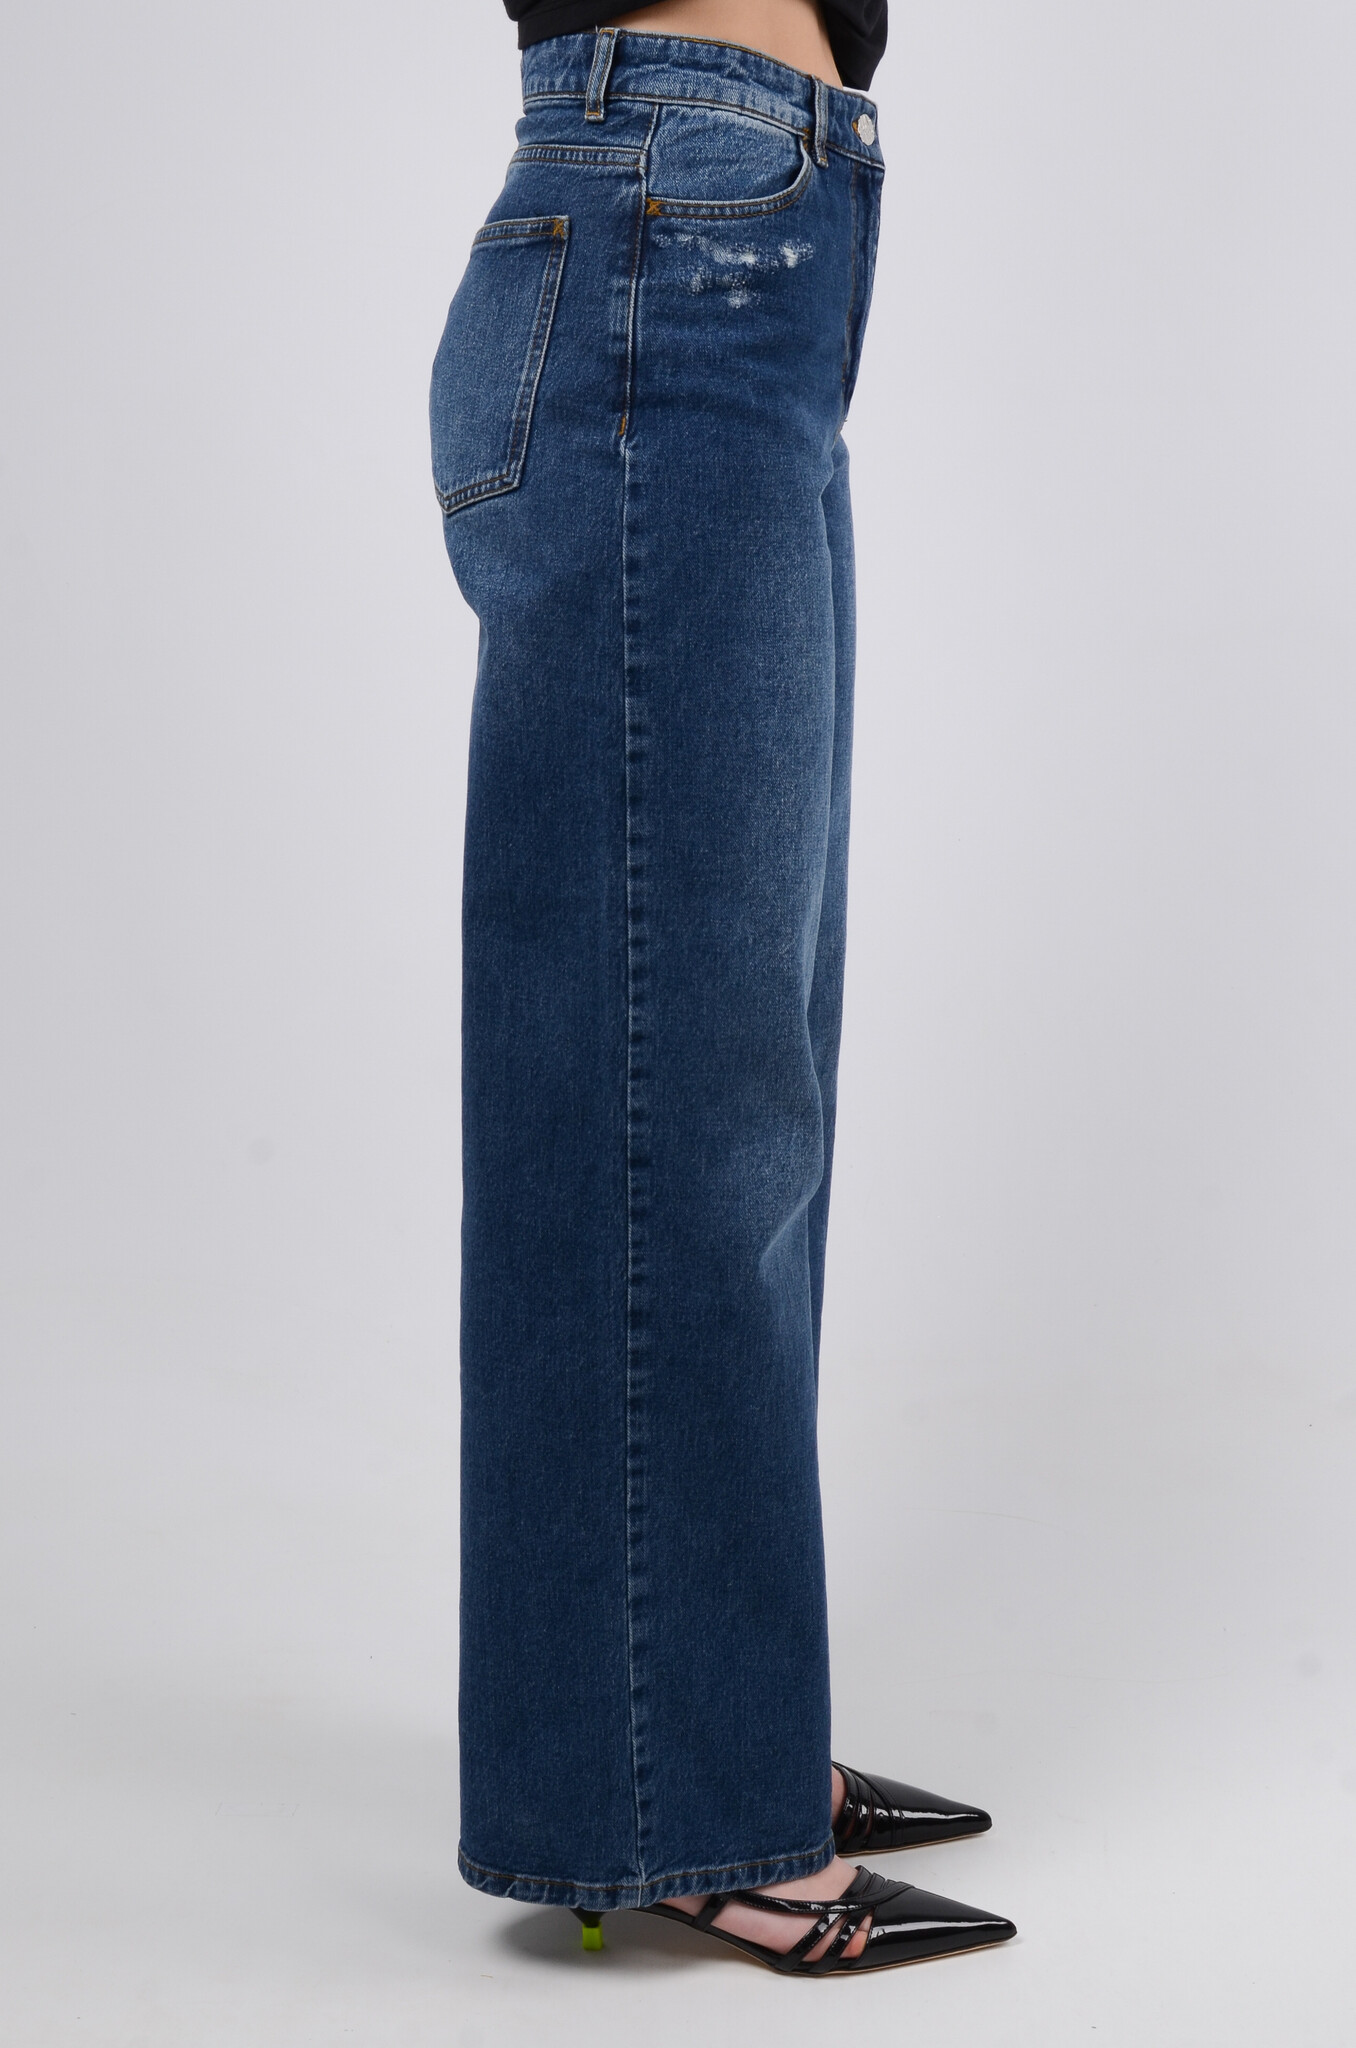 Nini Jeans in Washed Darkblue-5